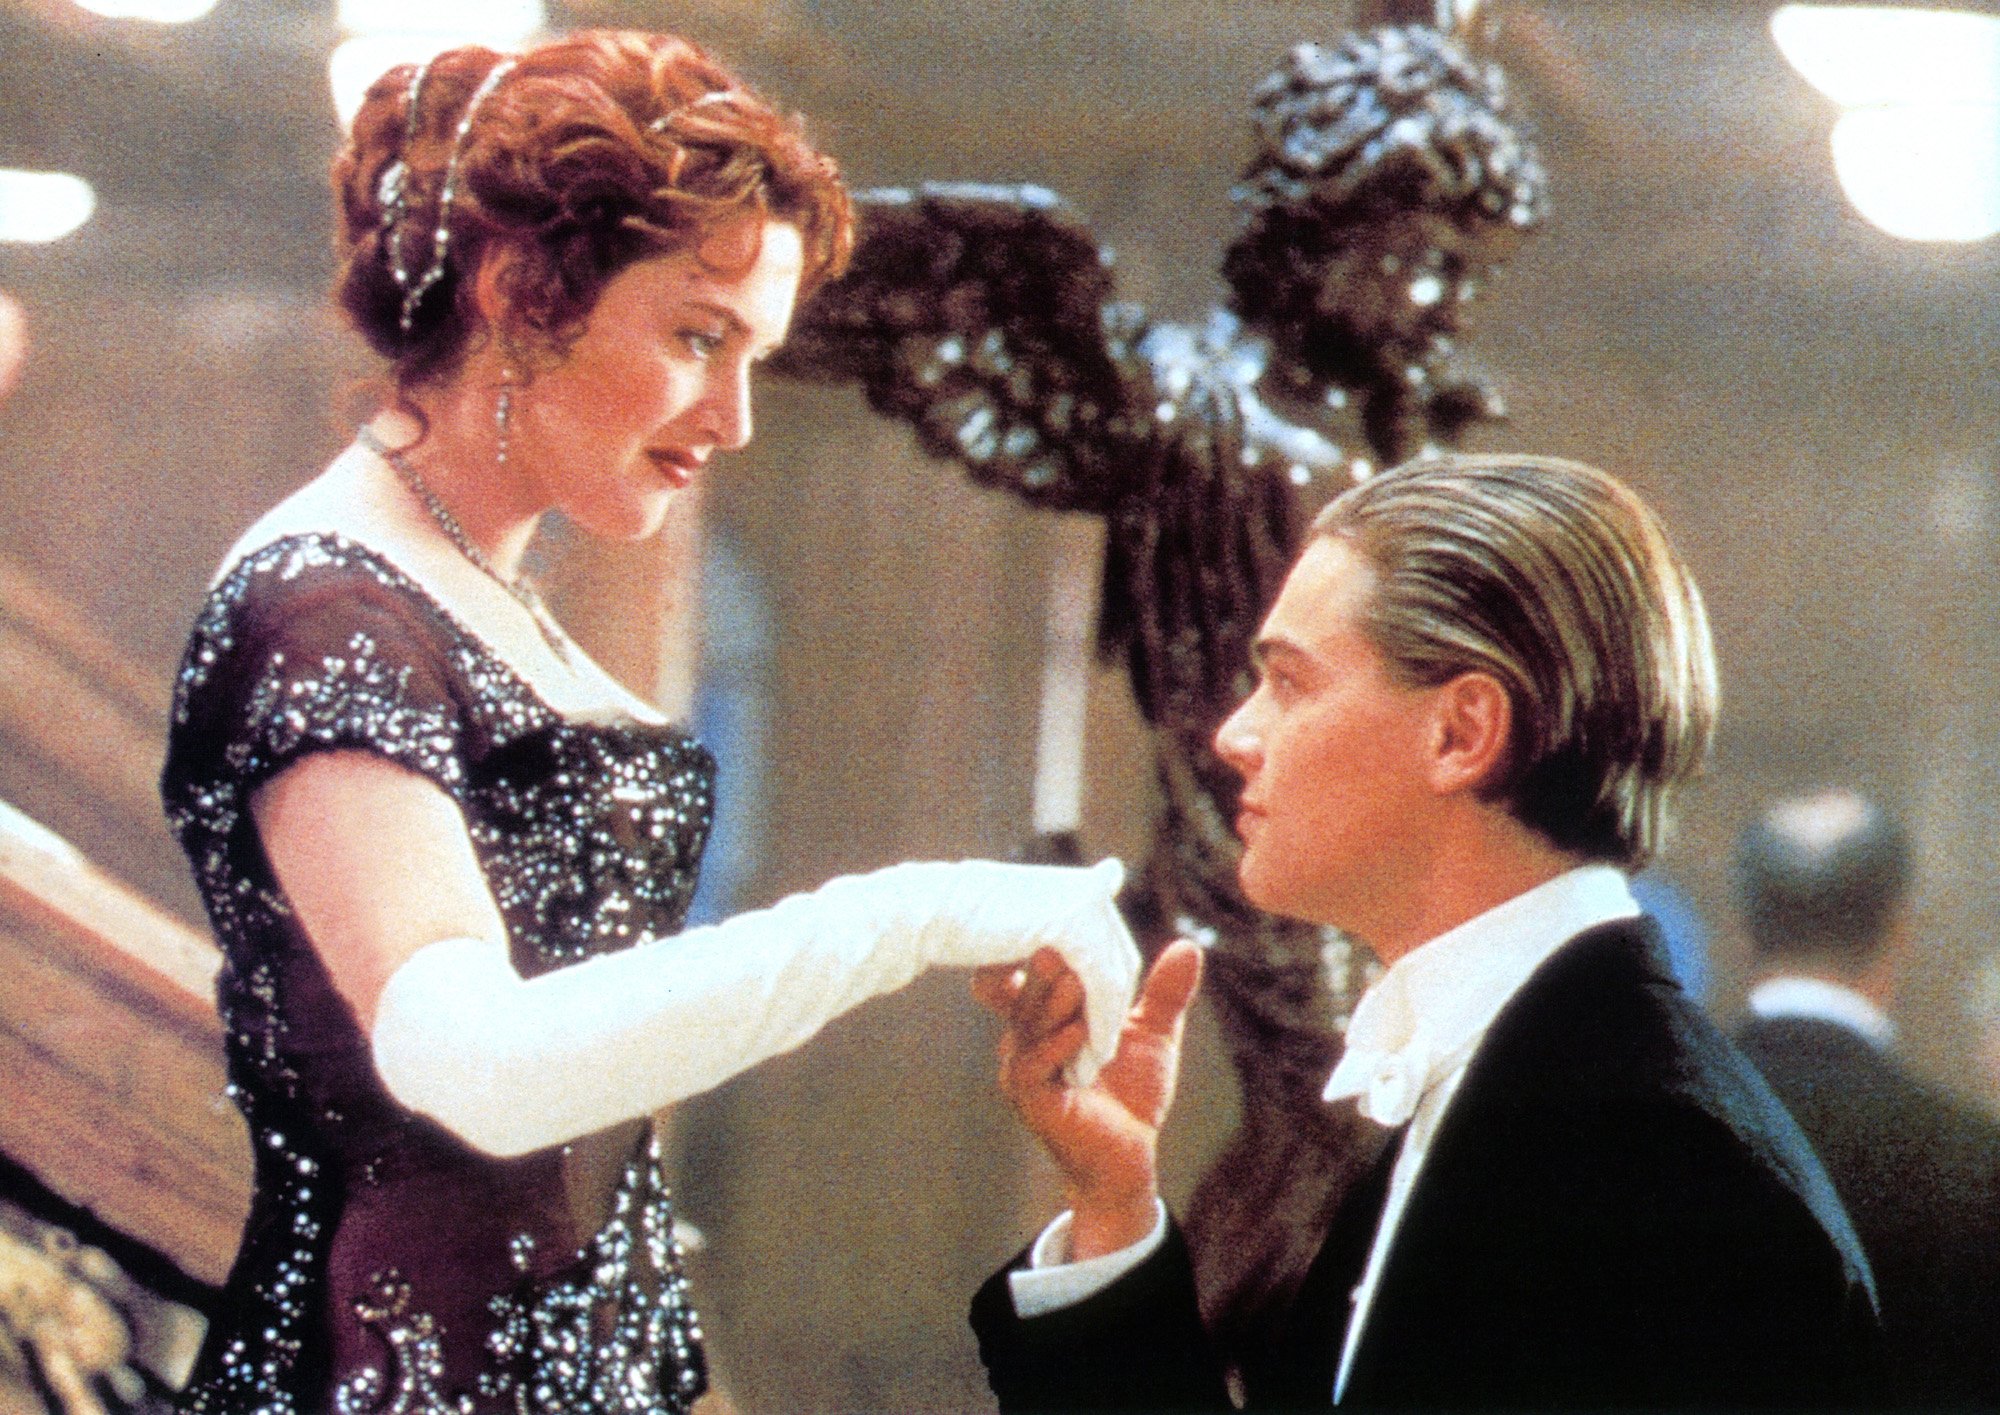 Kate Winslet offers her hand to Leonardo DiCaprio in a scene from the film 'Titanic', 1997.